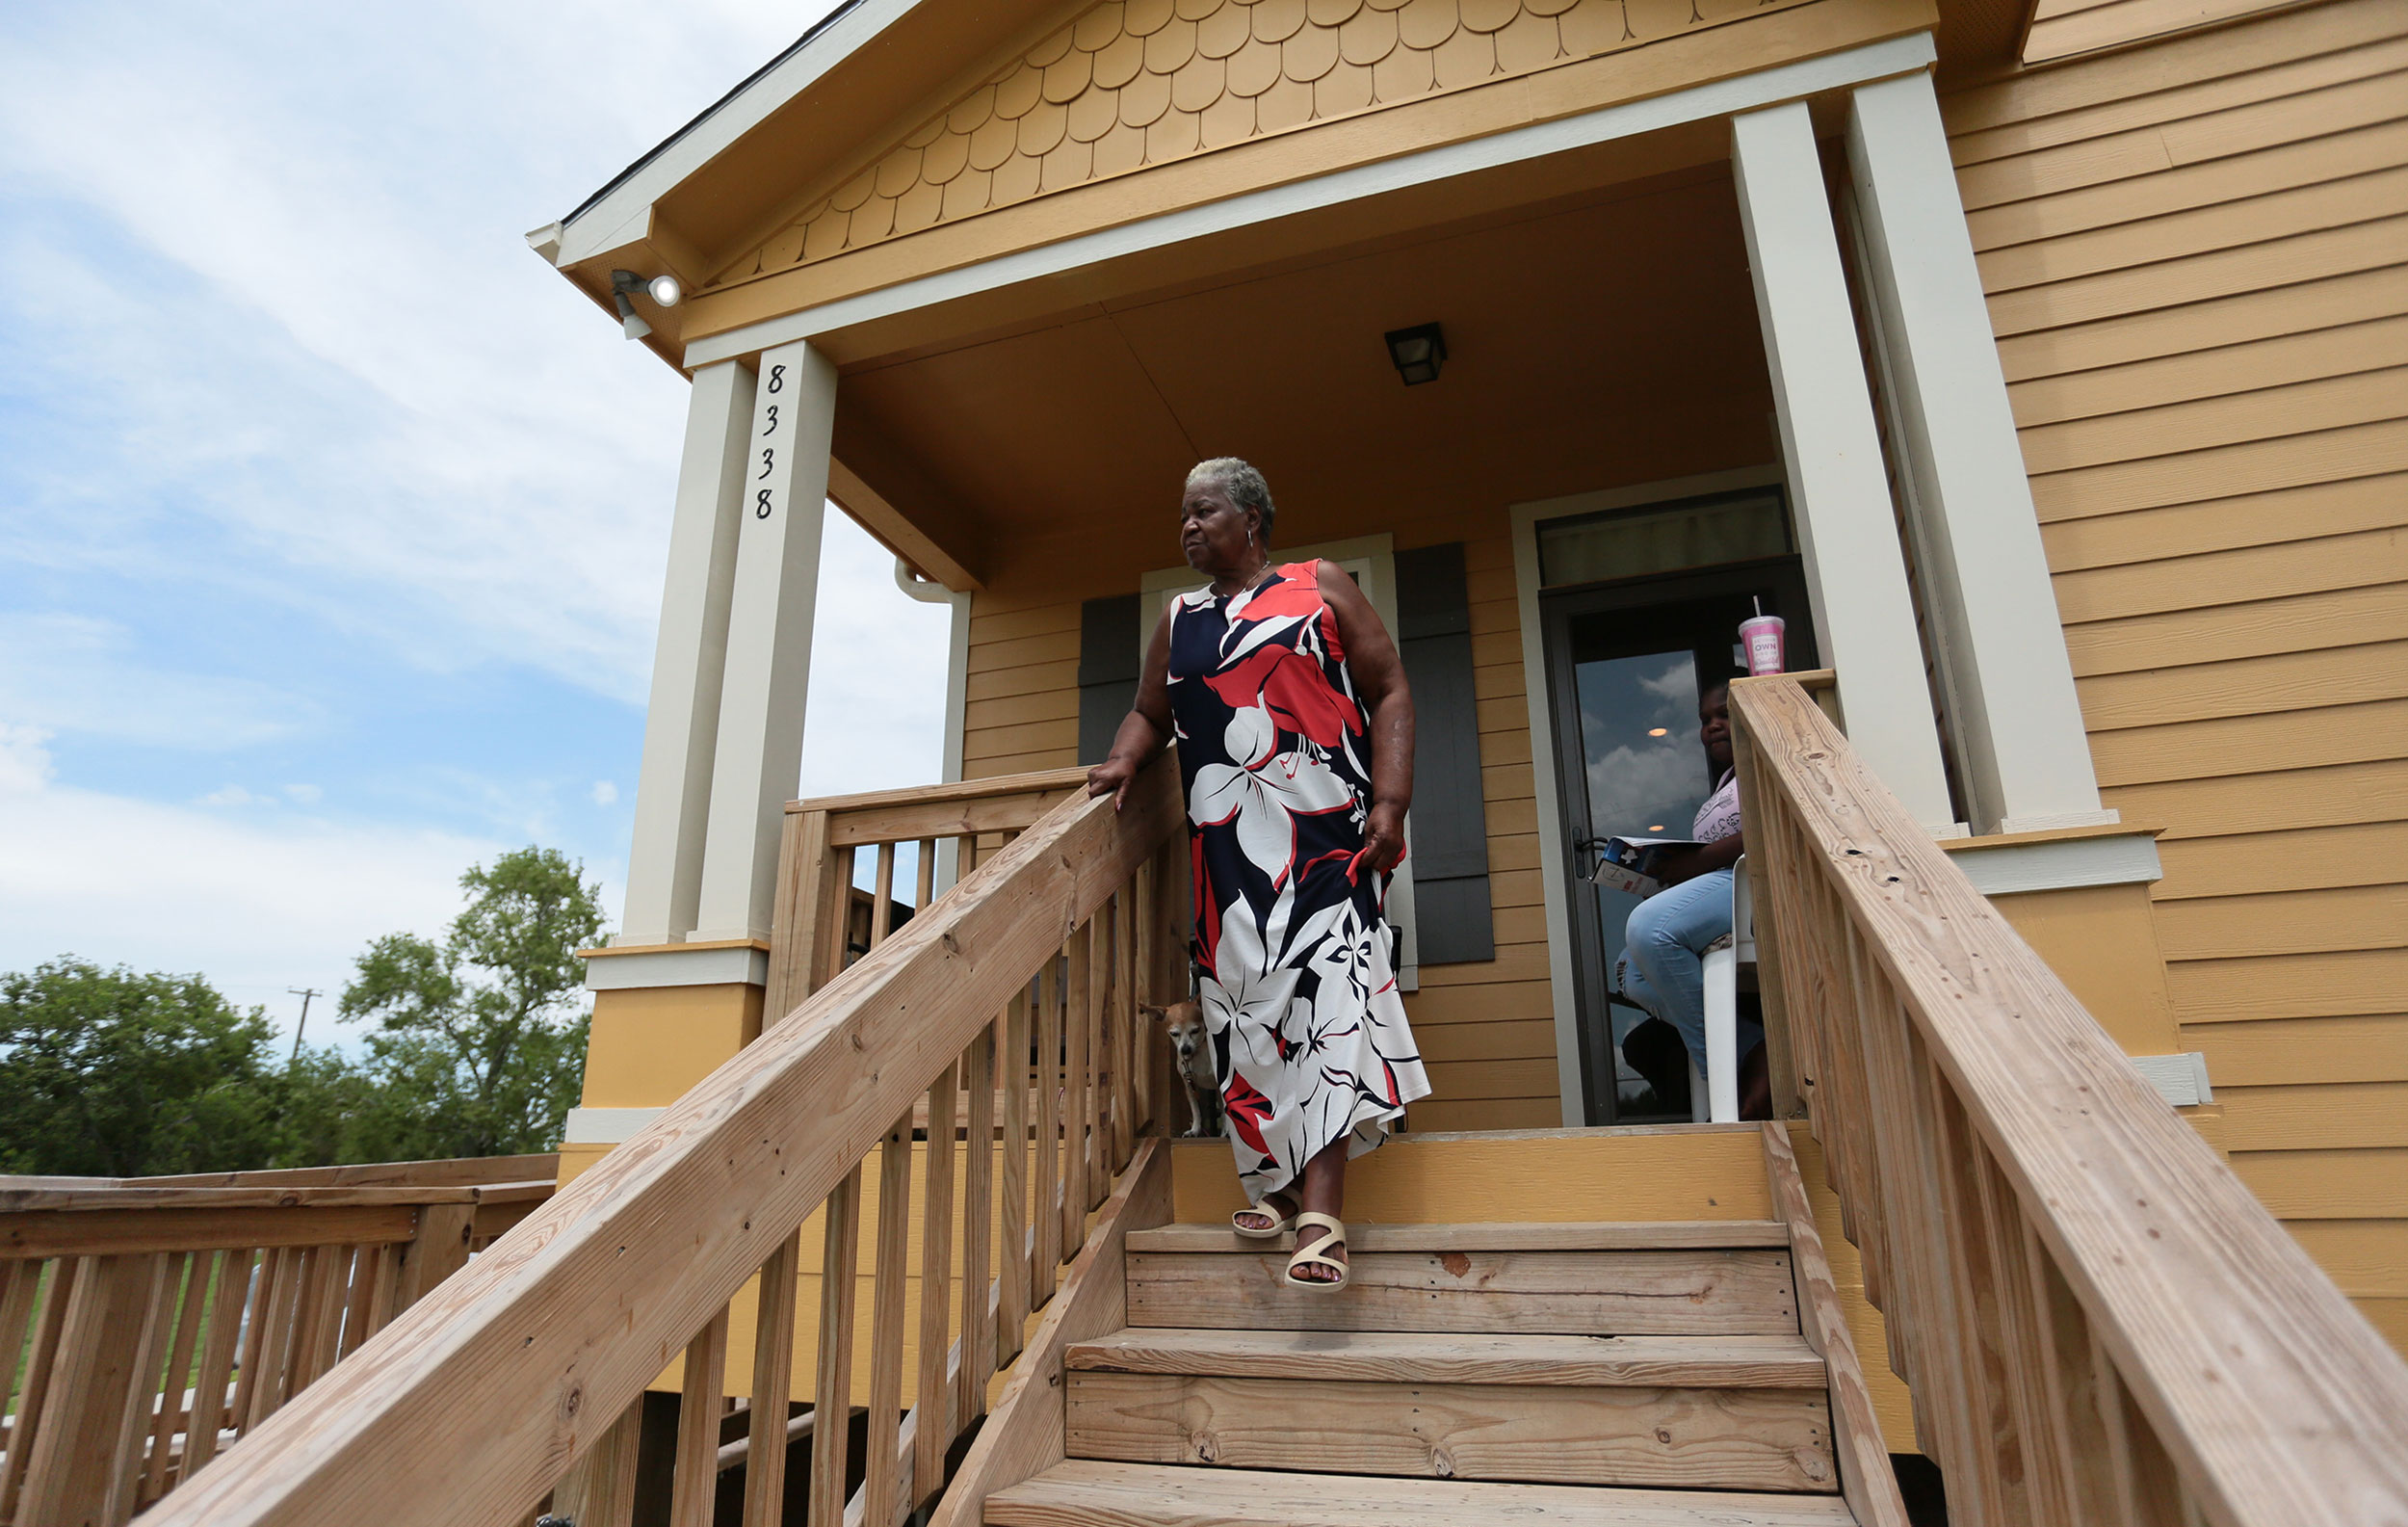 Beatrice Sanders now lives in a home elevated six feet off the ground in Port Arthur's Montrose neighborhood.